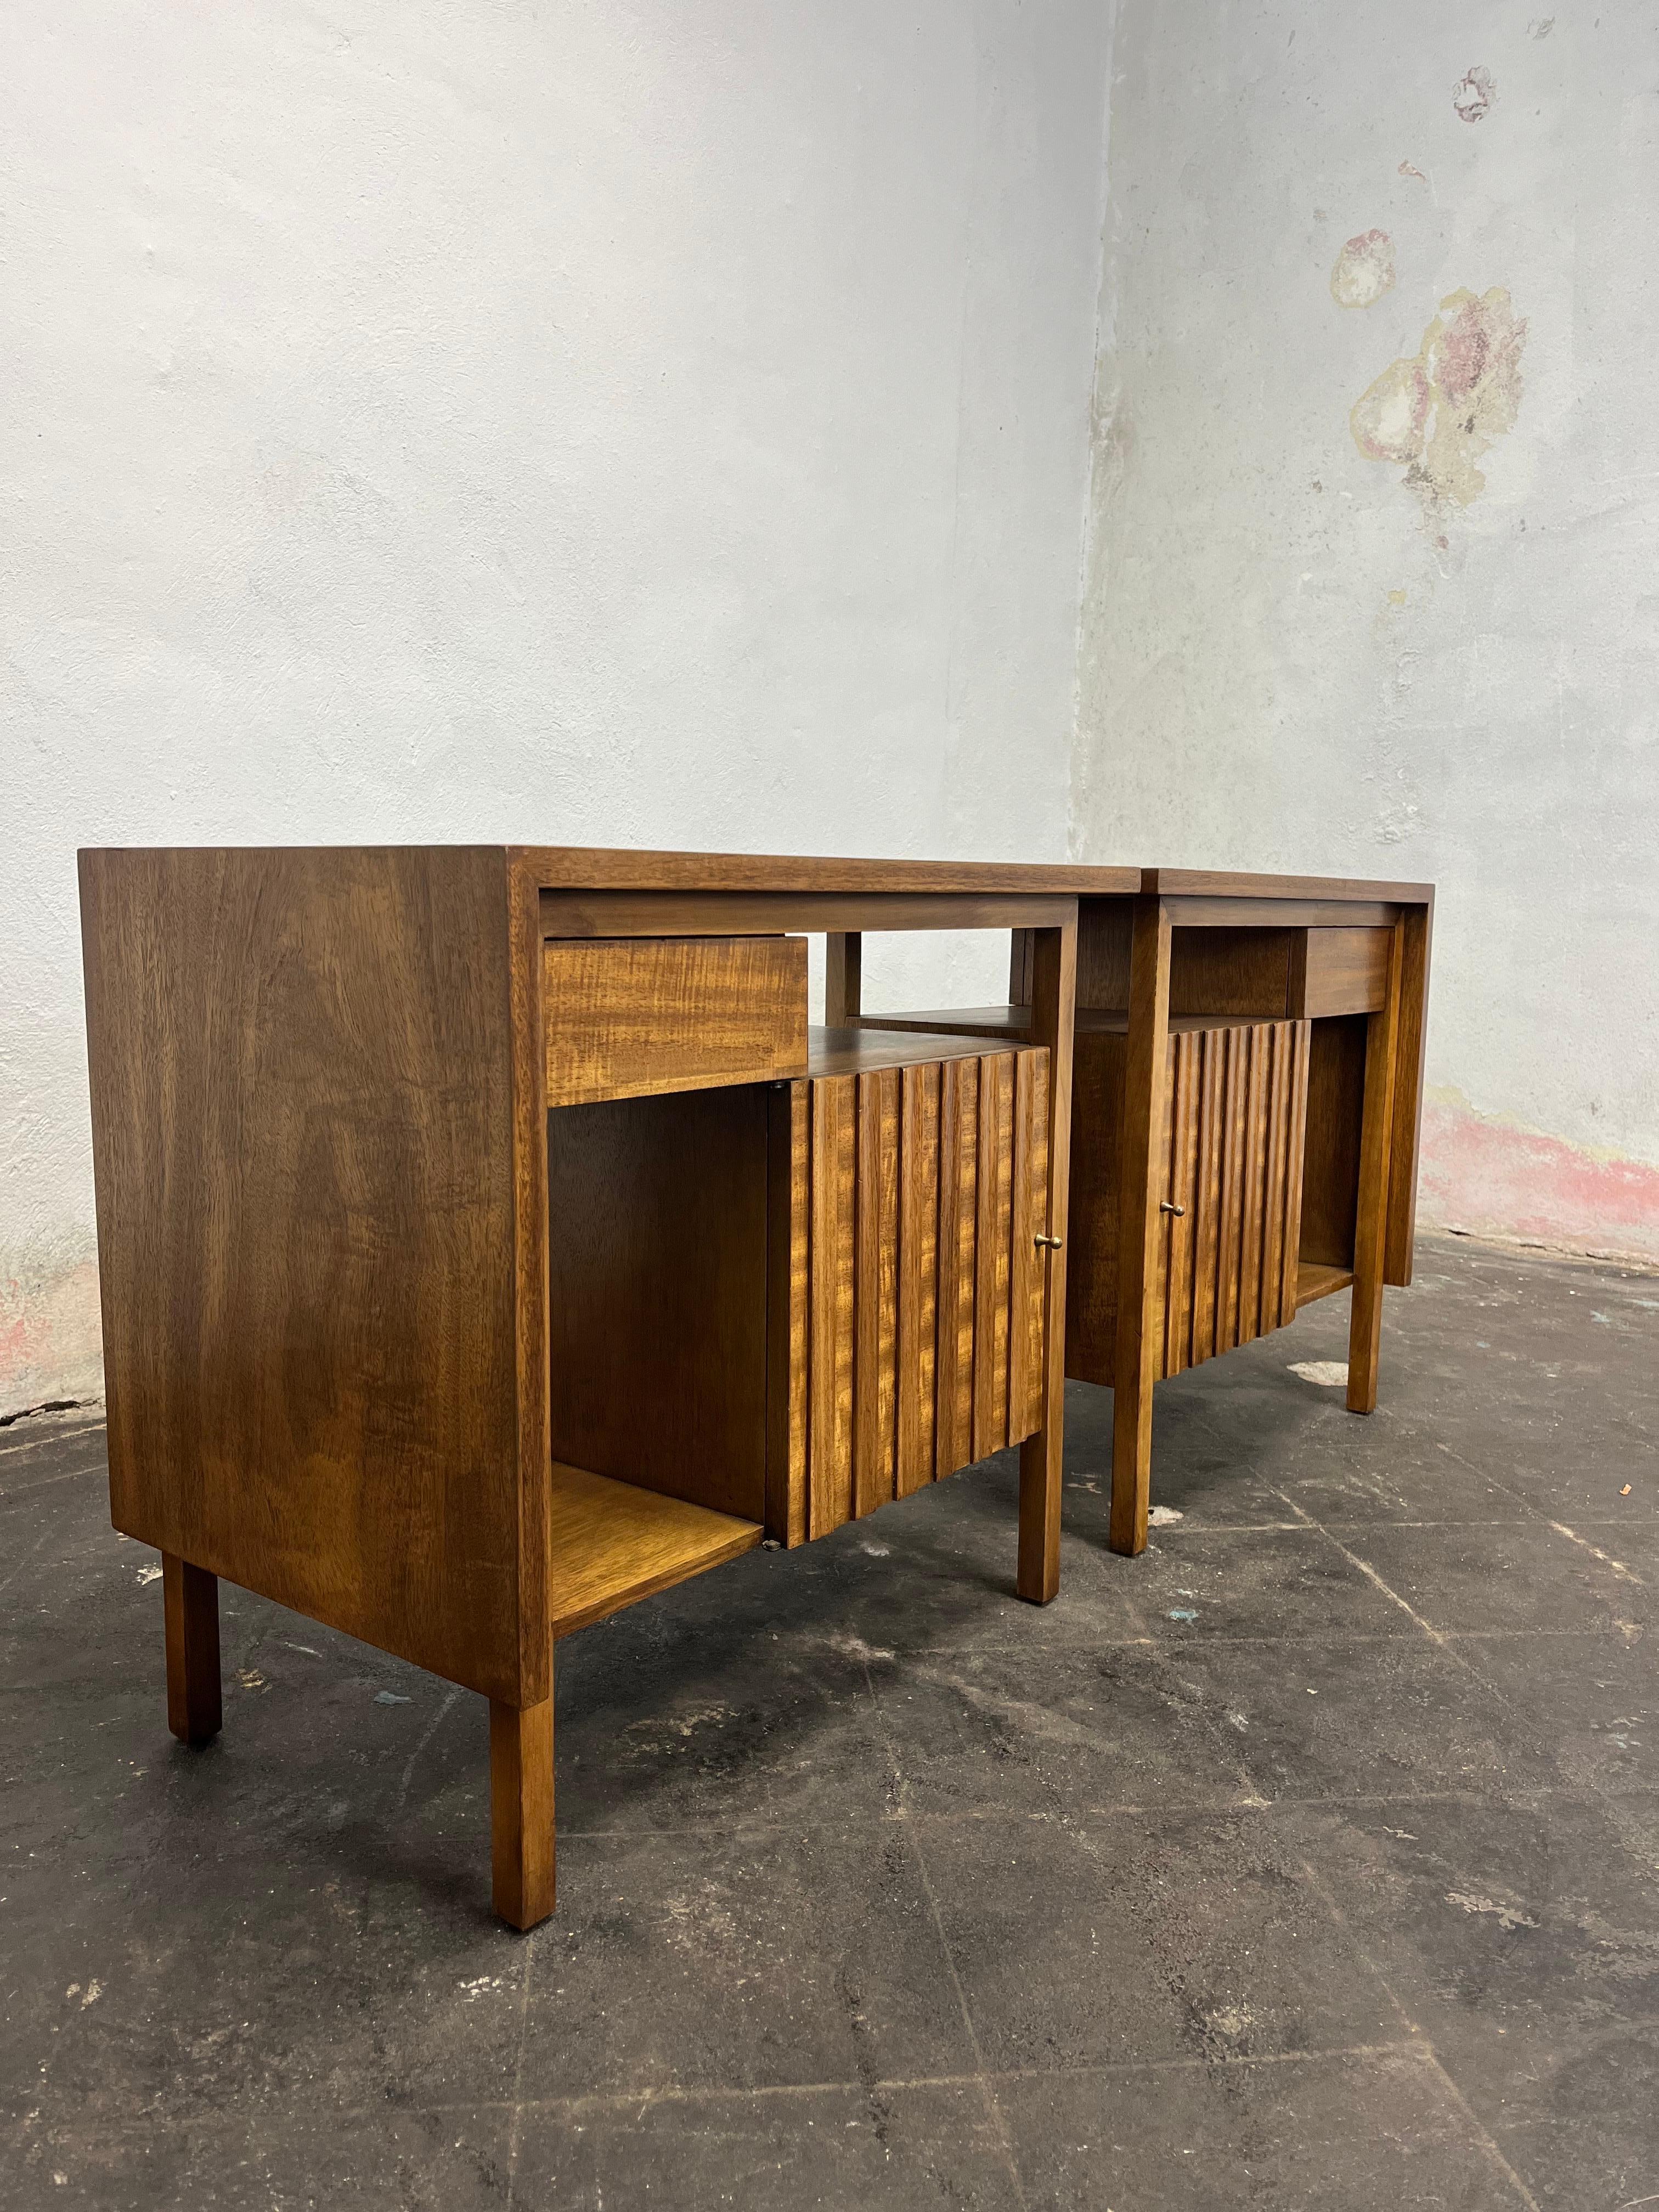 A gorgeous pair of Mid-Century Modern nightstands or end tables. Mid Century John Widdicomb scultped walnut night stands with brass pulls. 
USA, Circa 1950s
The nightstands are finished on the back and could be used floating in a room.
Curbside to